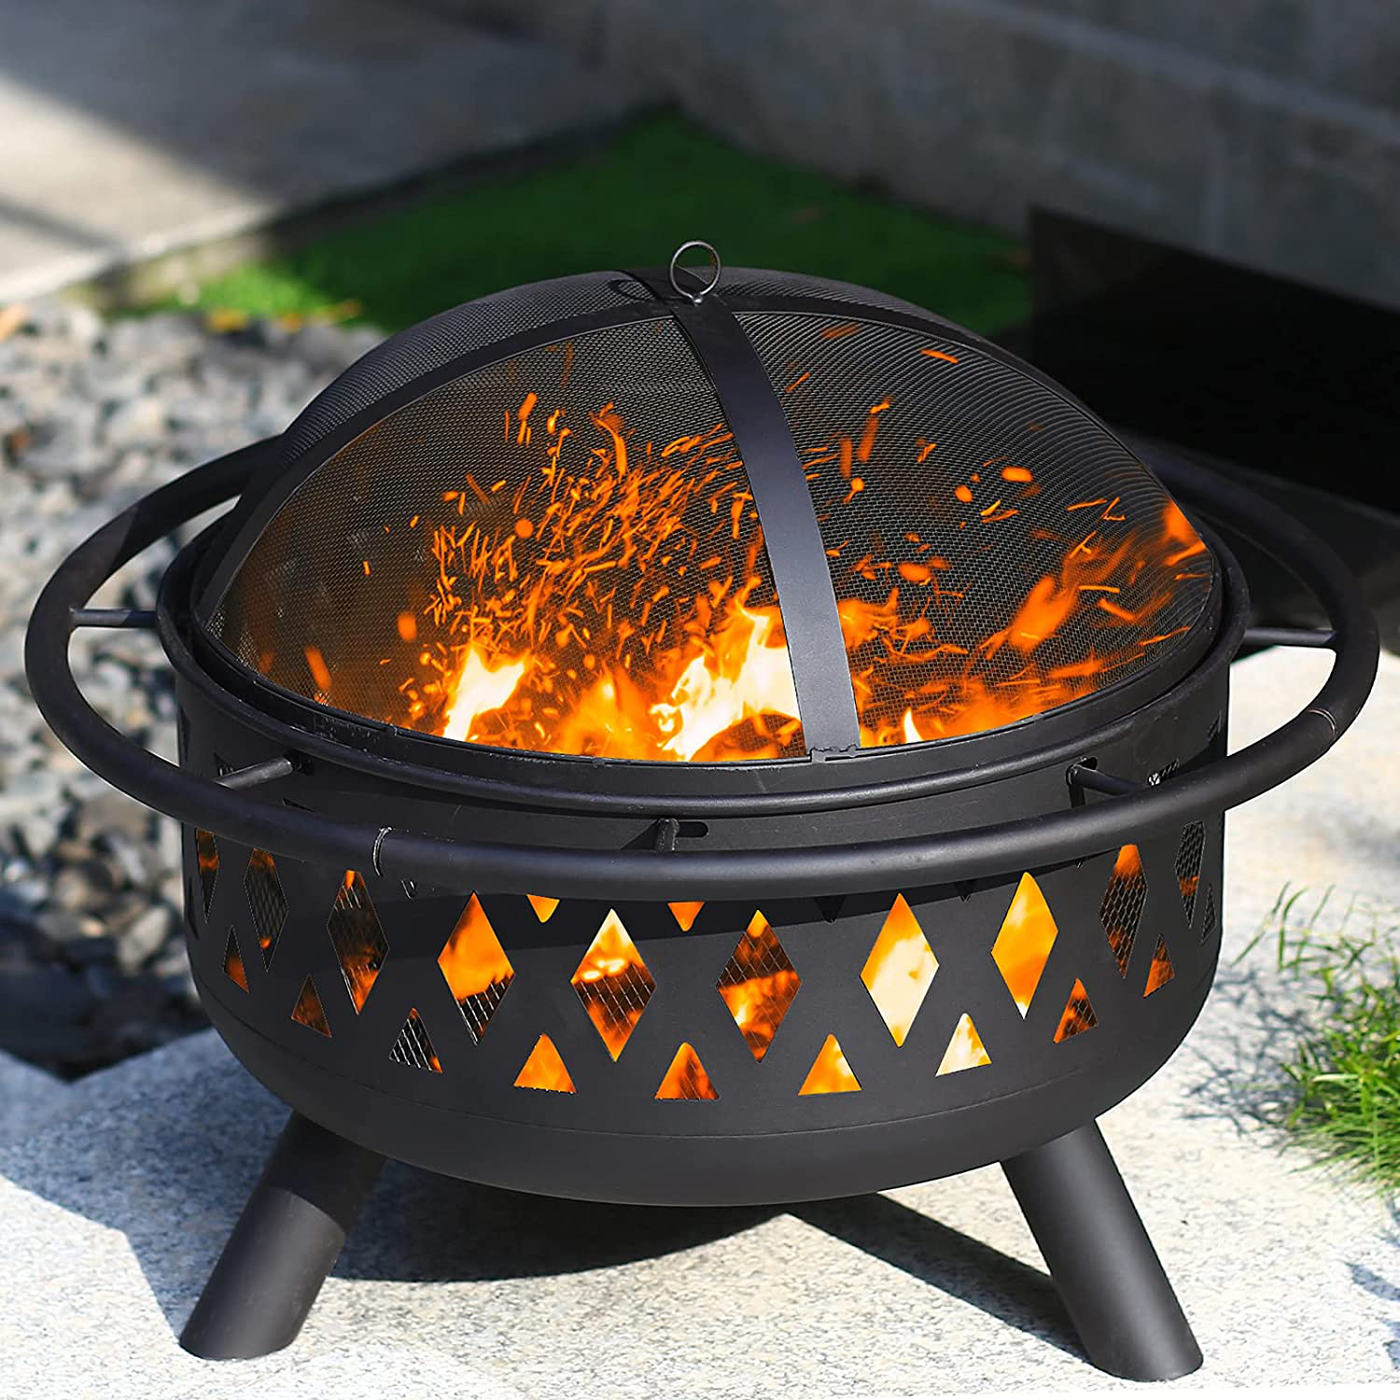 CGVOVOT Outdoor Fire Pits - 30 Inch Round Fire Pit Grill & Patio Firepit Bowl - Durable Spark Screen and Fireplace Poker